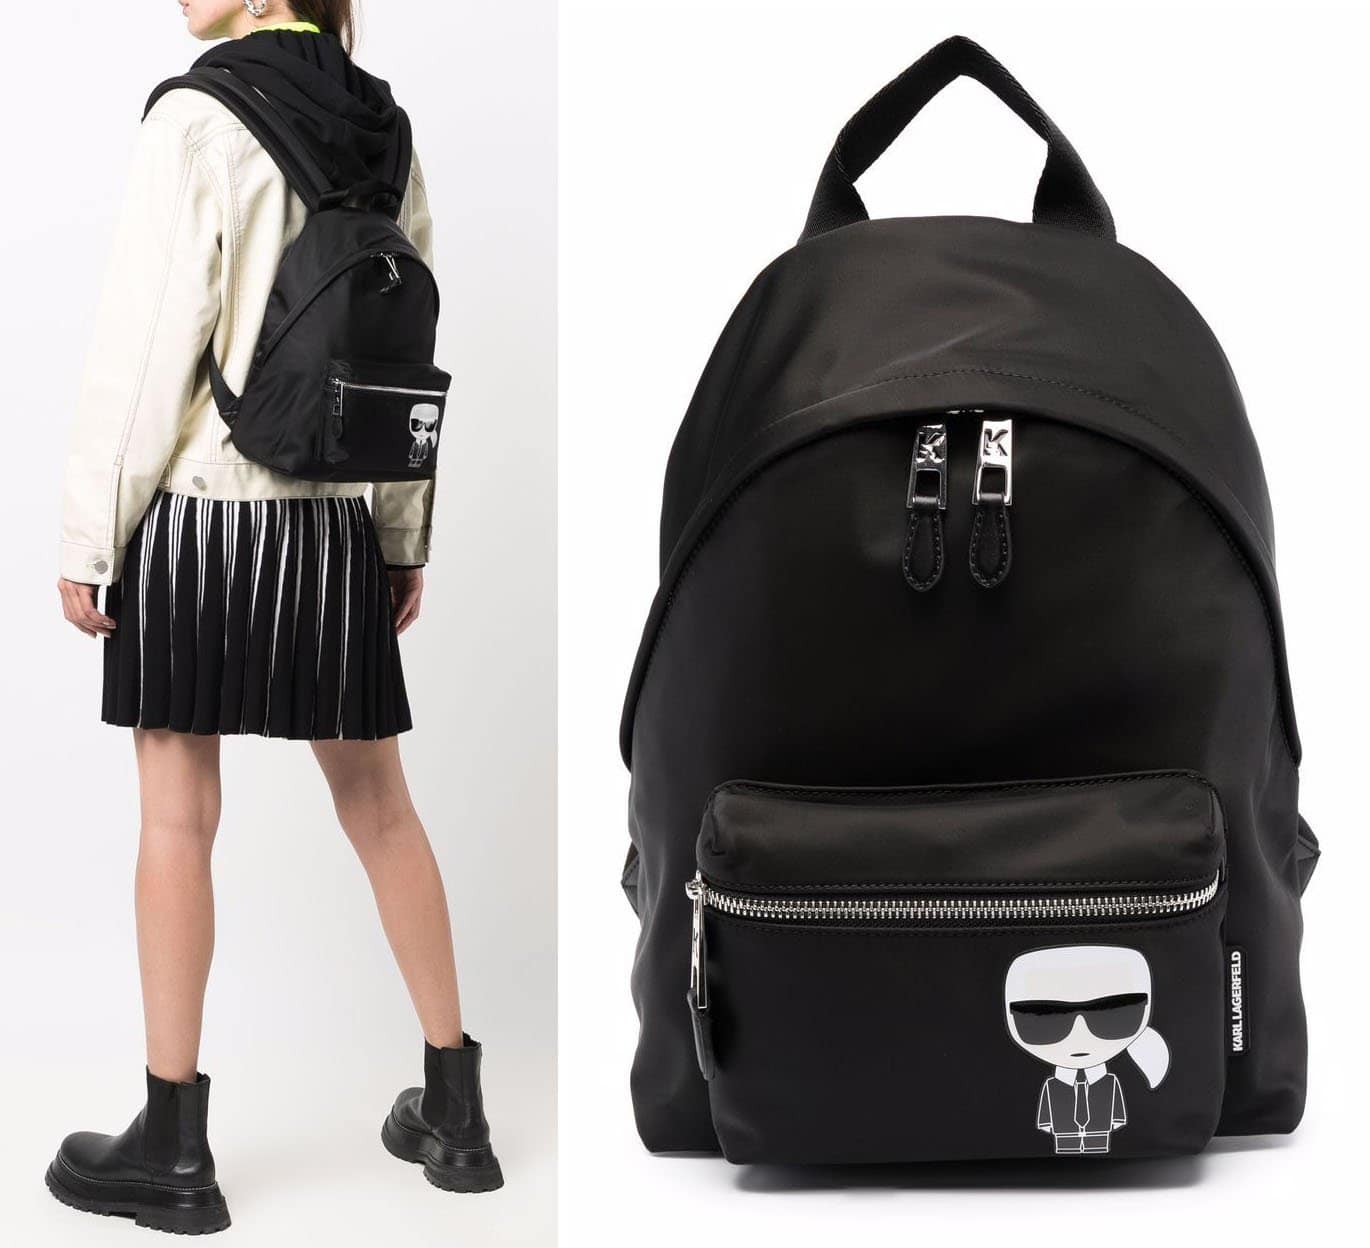 Karl Lagerfeld's graphic logo and silver hardware define this rather simple black backpack